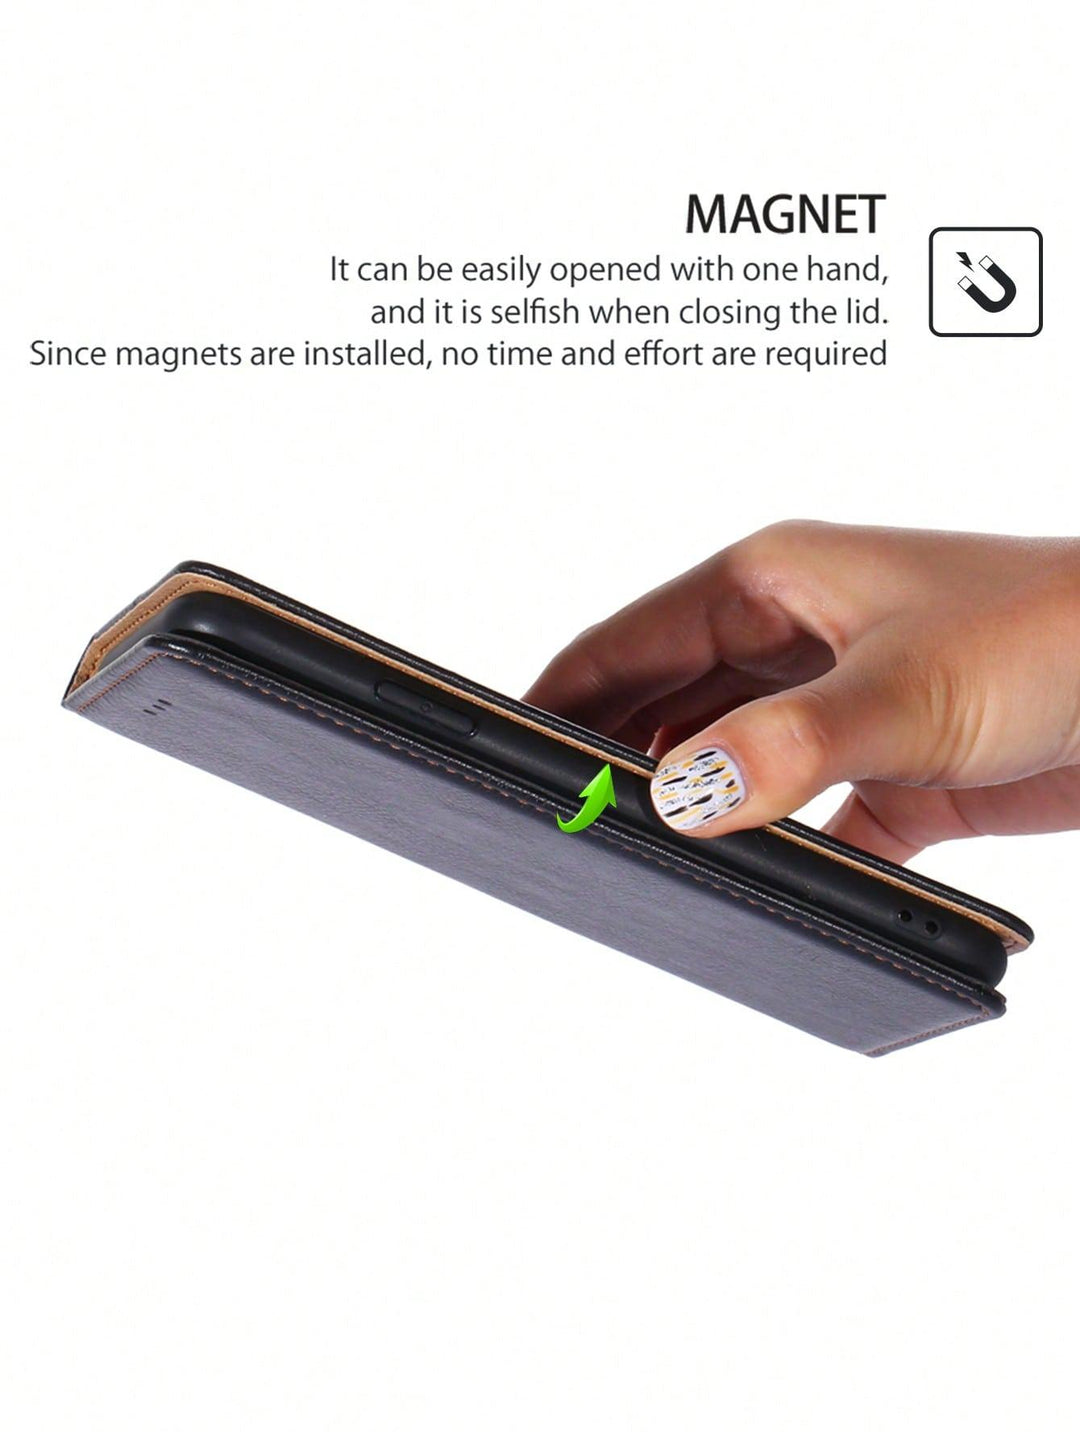 Wallet Design PU Anti Fall Magnetic Phone Case - Brand My Case